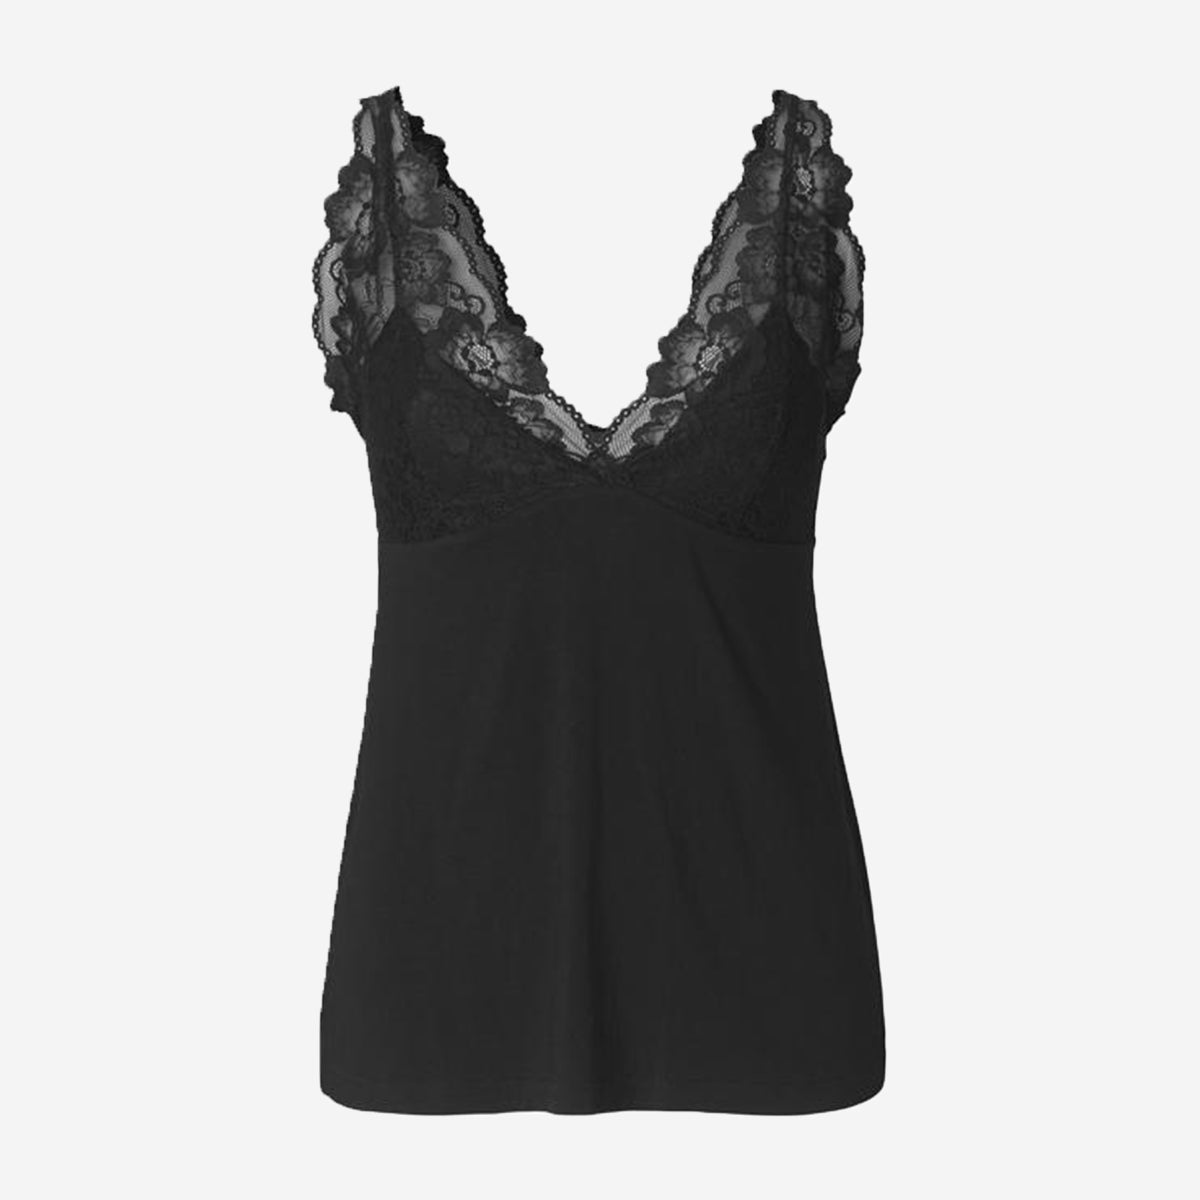 SILK TOP WITH LACE